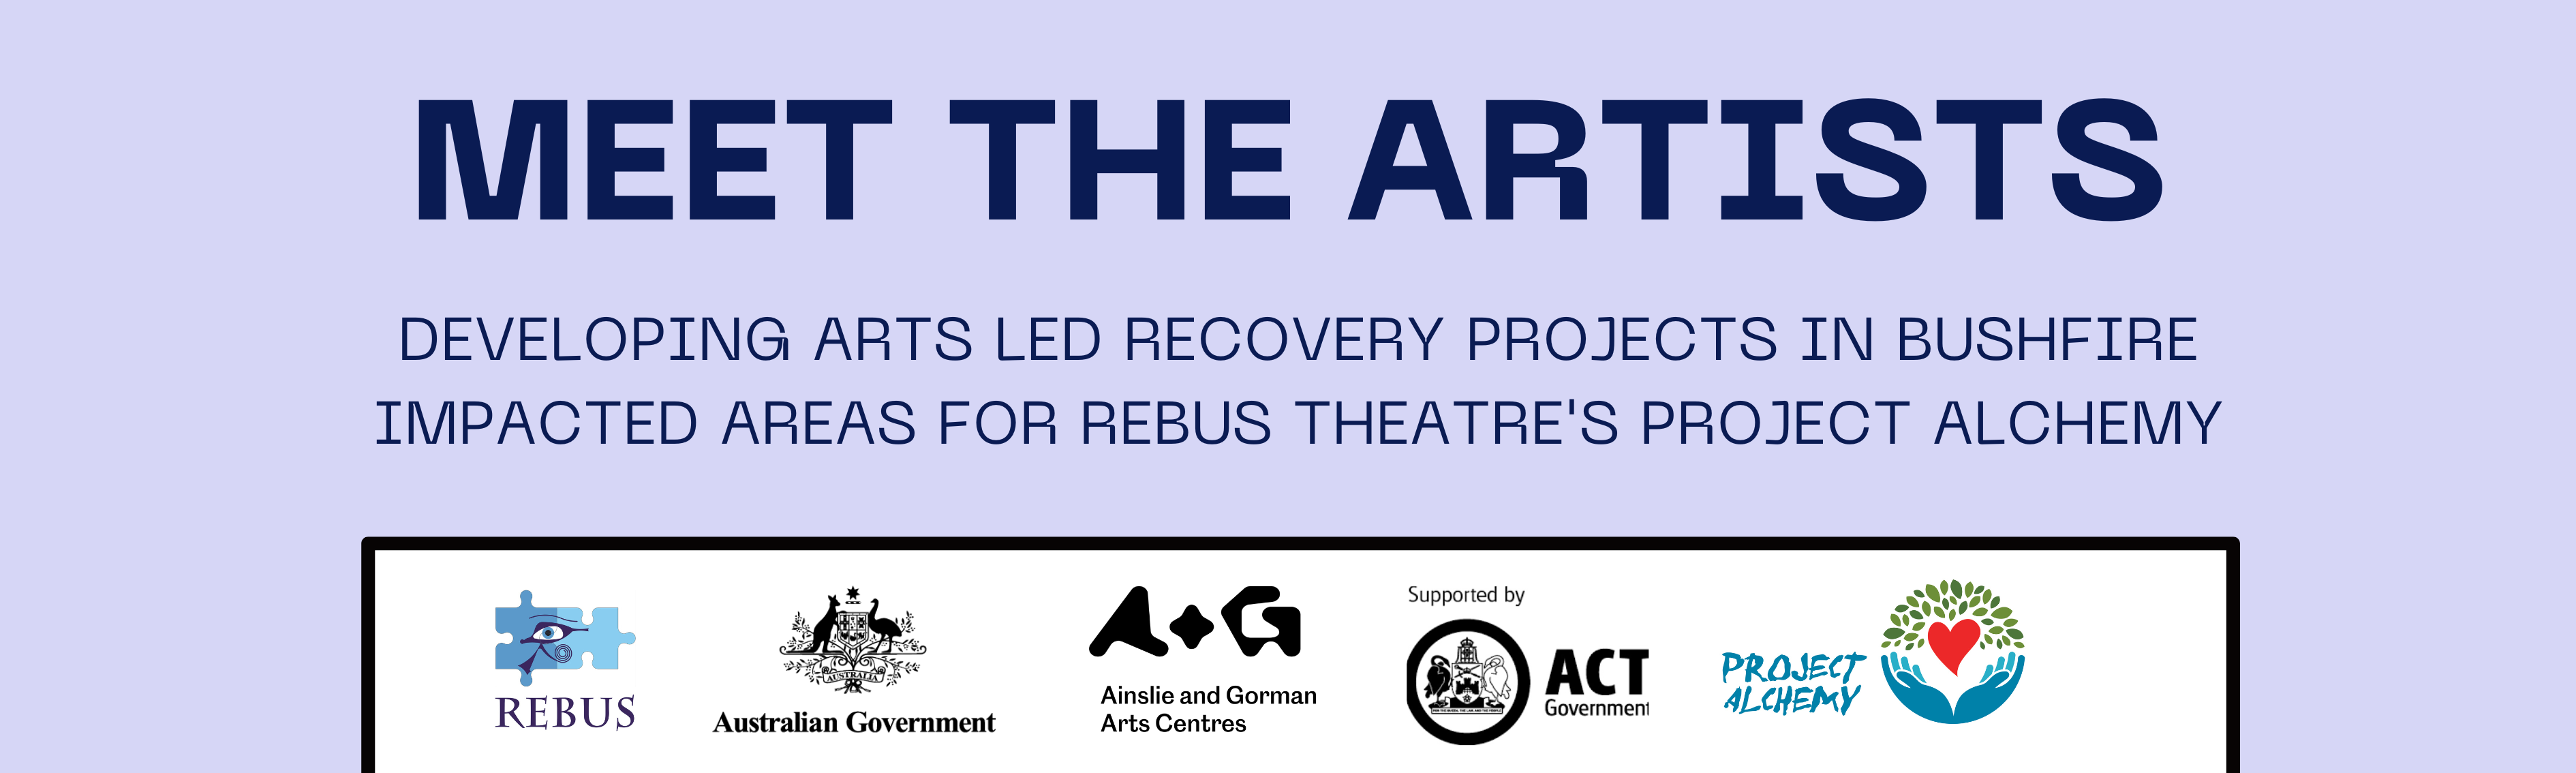 Meet the artists developing arts led recovery projects in bushfire impacted areas for Rebus Theatre's Project Alchemy